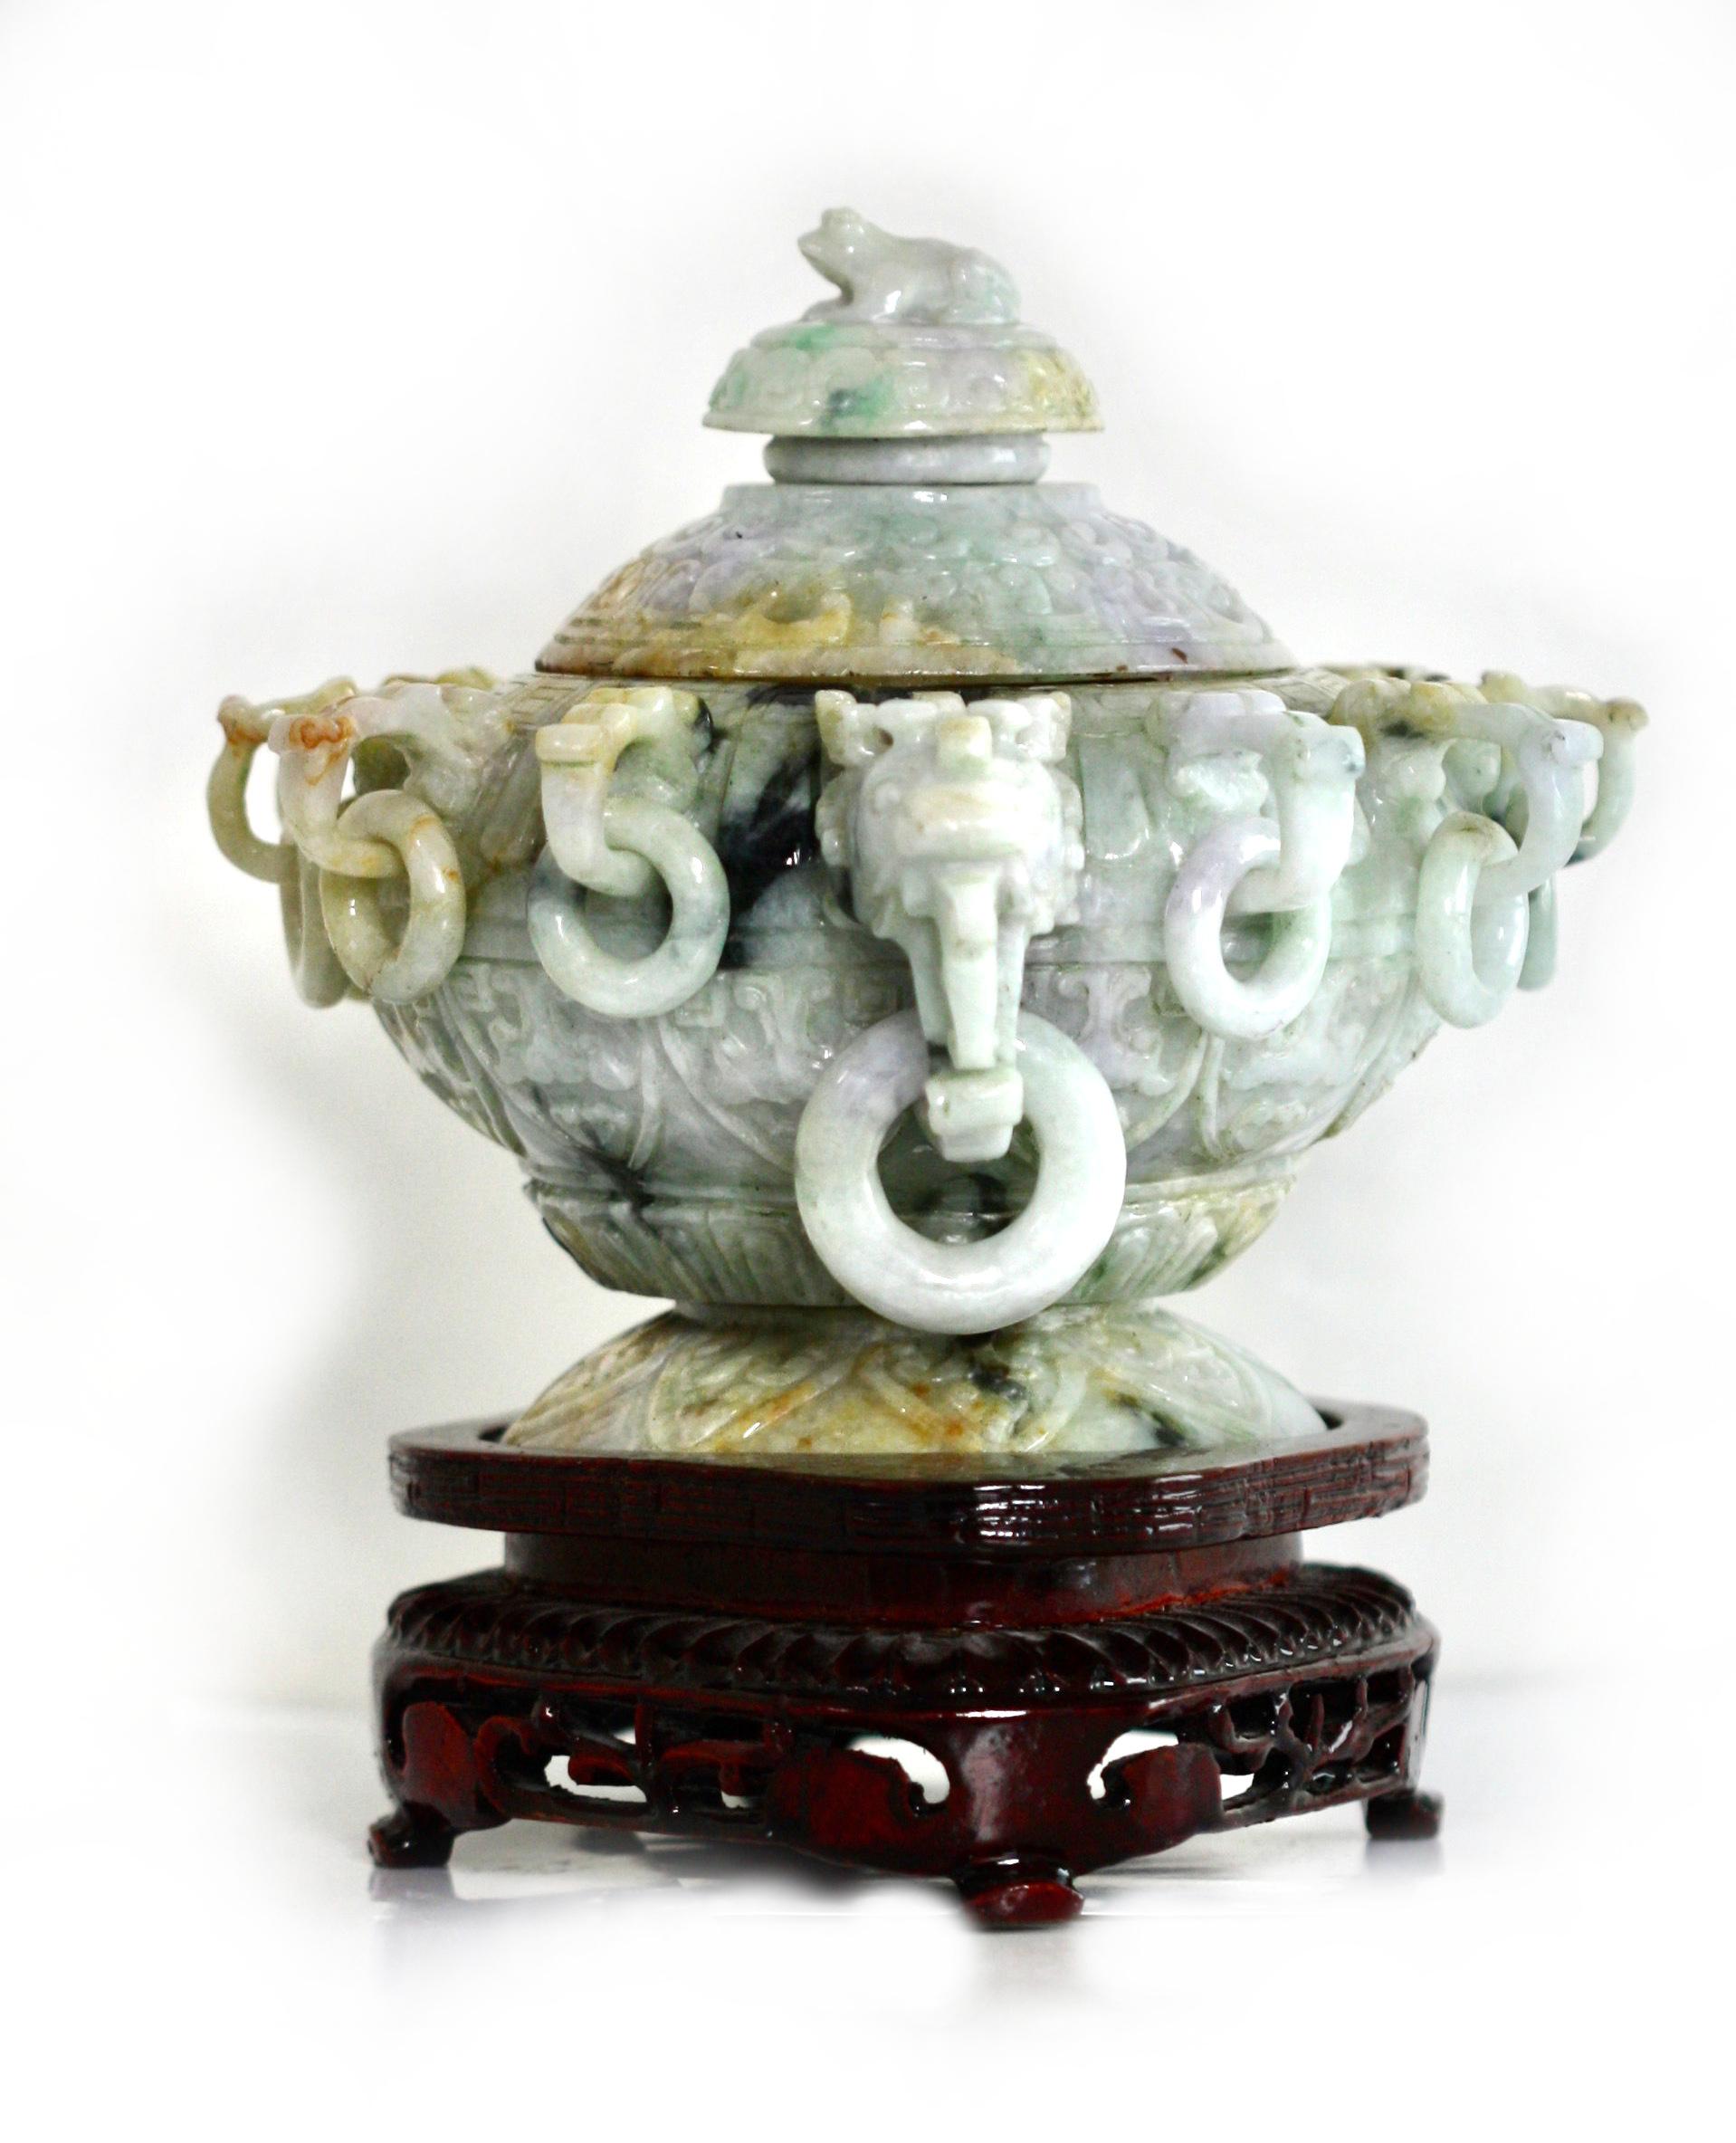 
Chinese Unusual Multi-Colored Jade Covered Bowl/Censor. 
The circular body with two projecting dragon mask handles with loose rings and with ten additional projecting stylized masks also with loose rings, the circular knopped cover with a frog